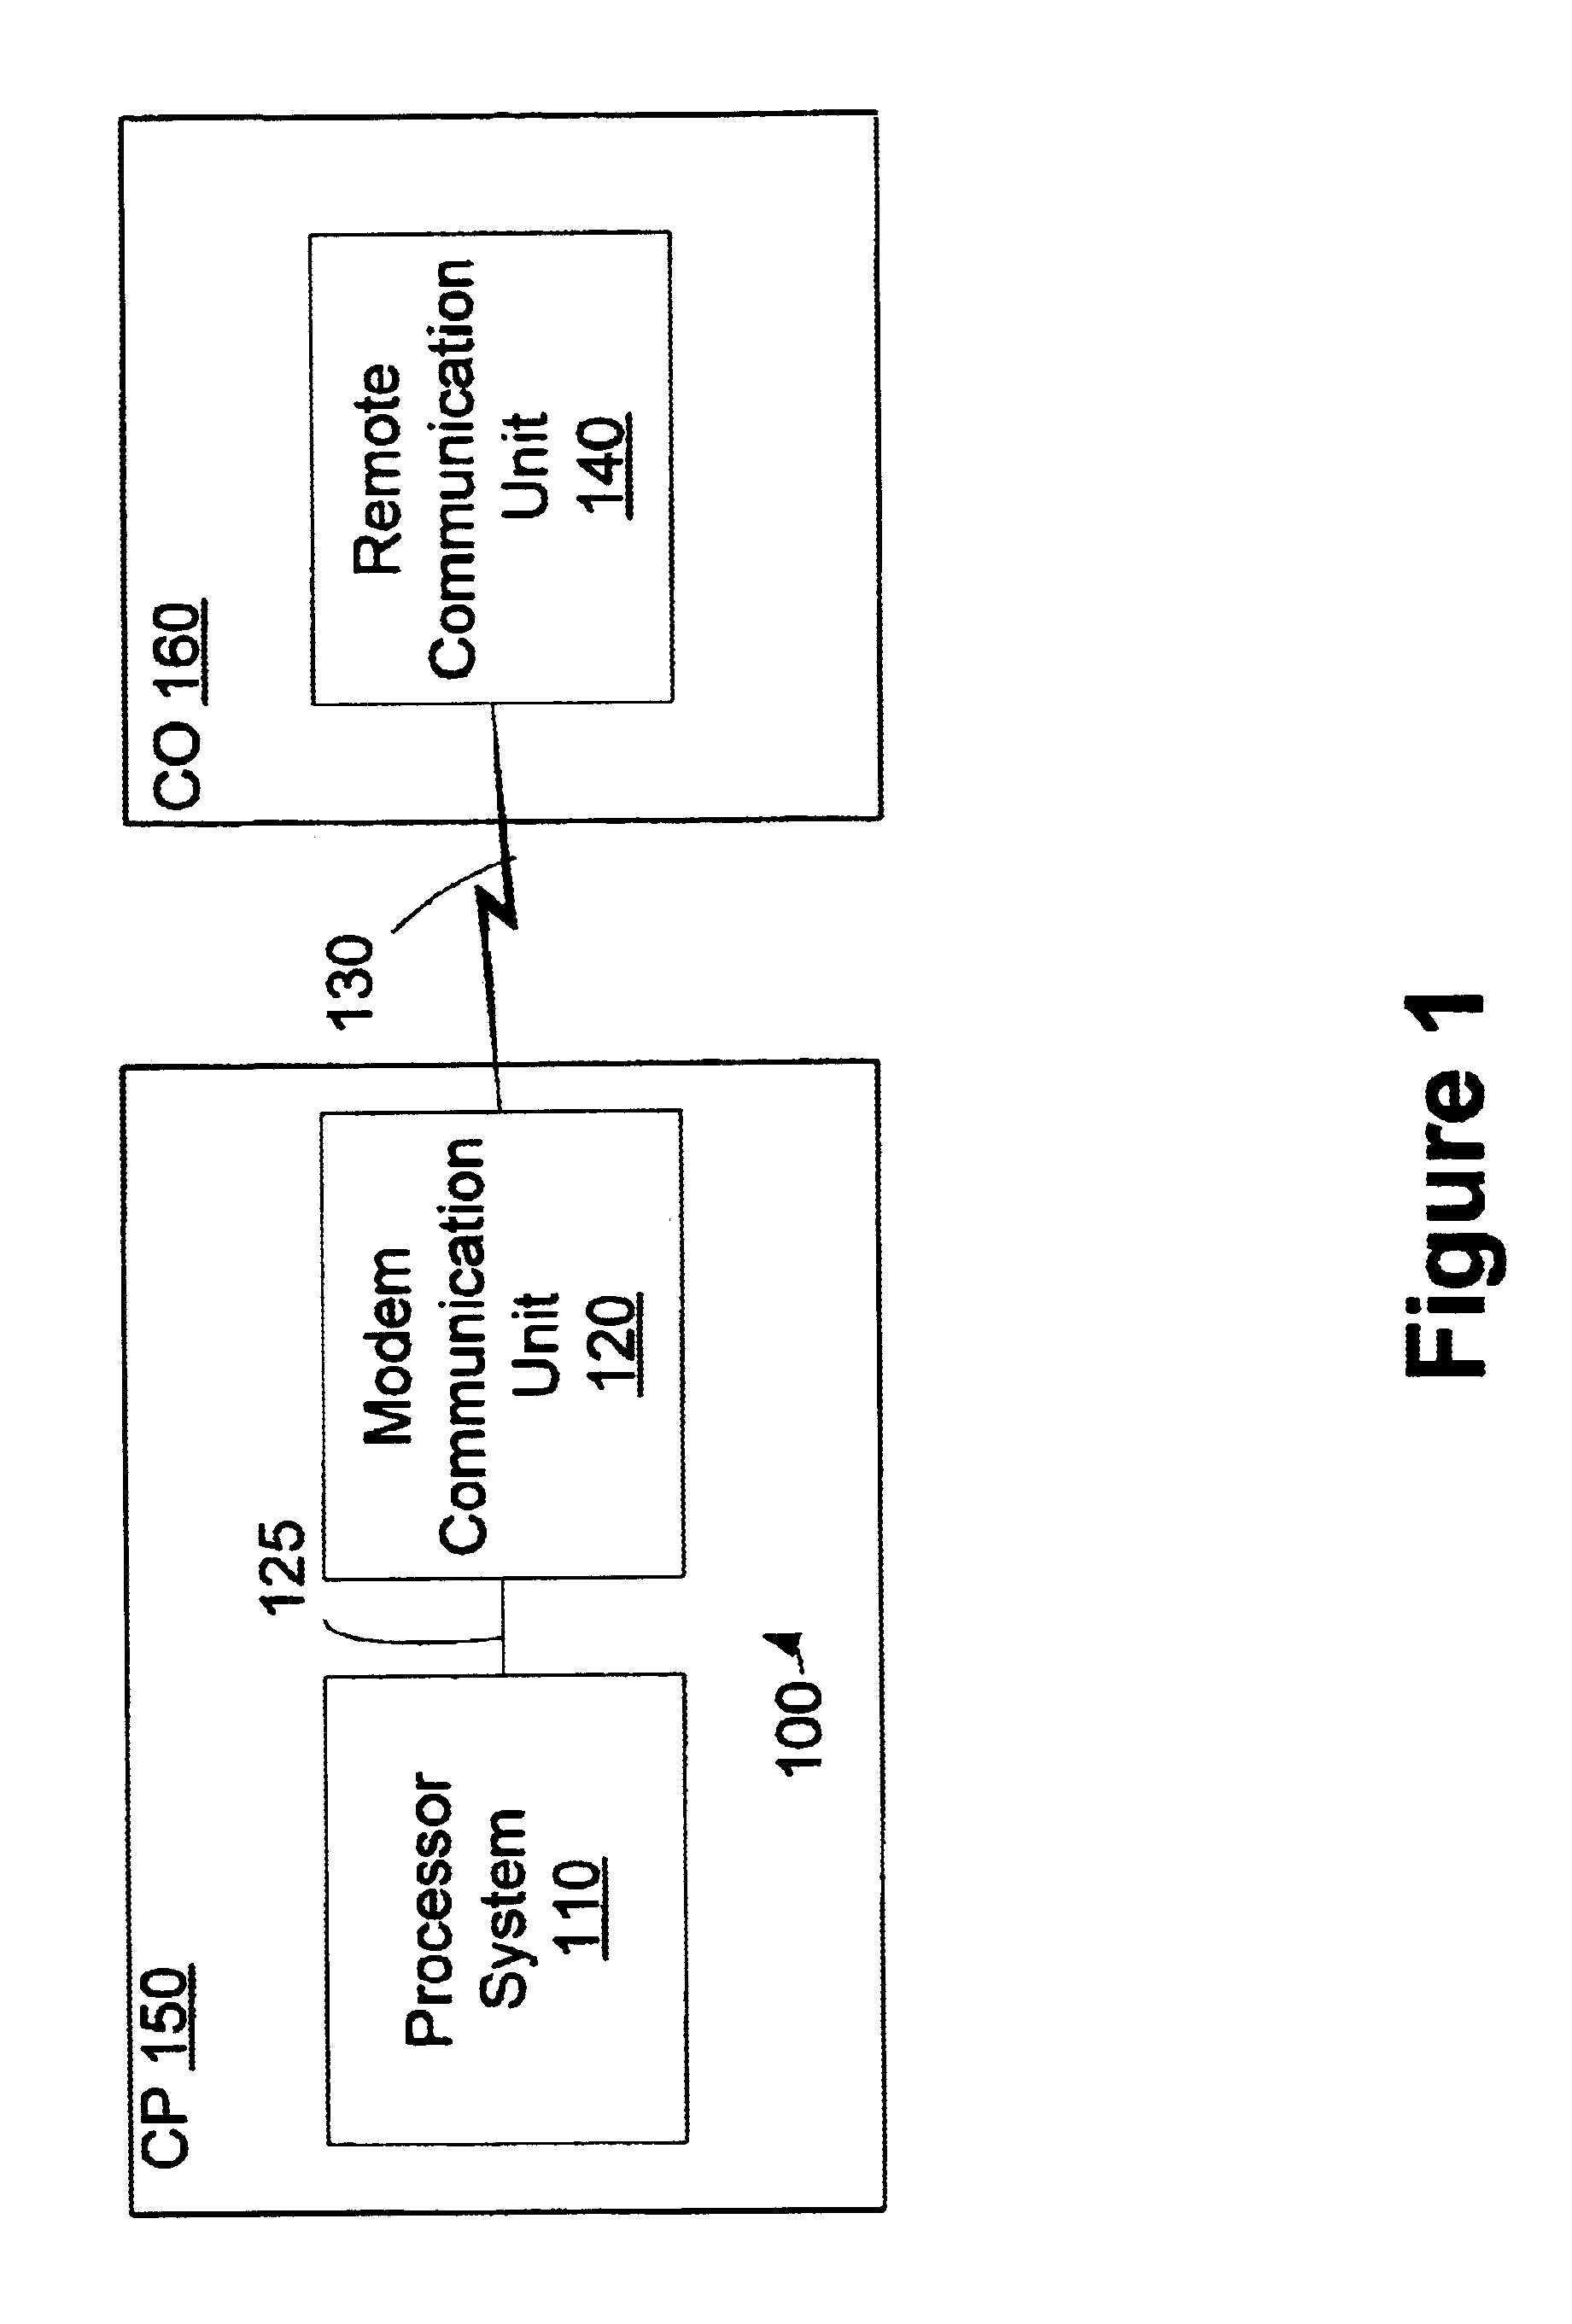 Method and apparatus for buffering data samples in a software based ADSL modem